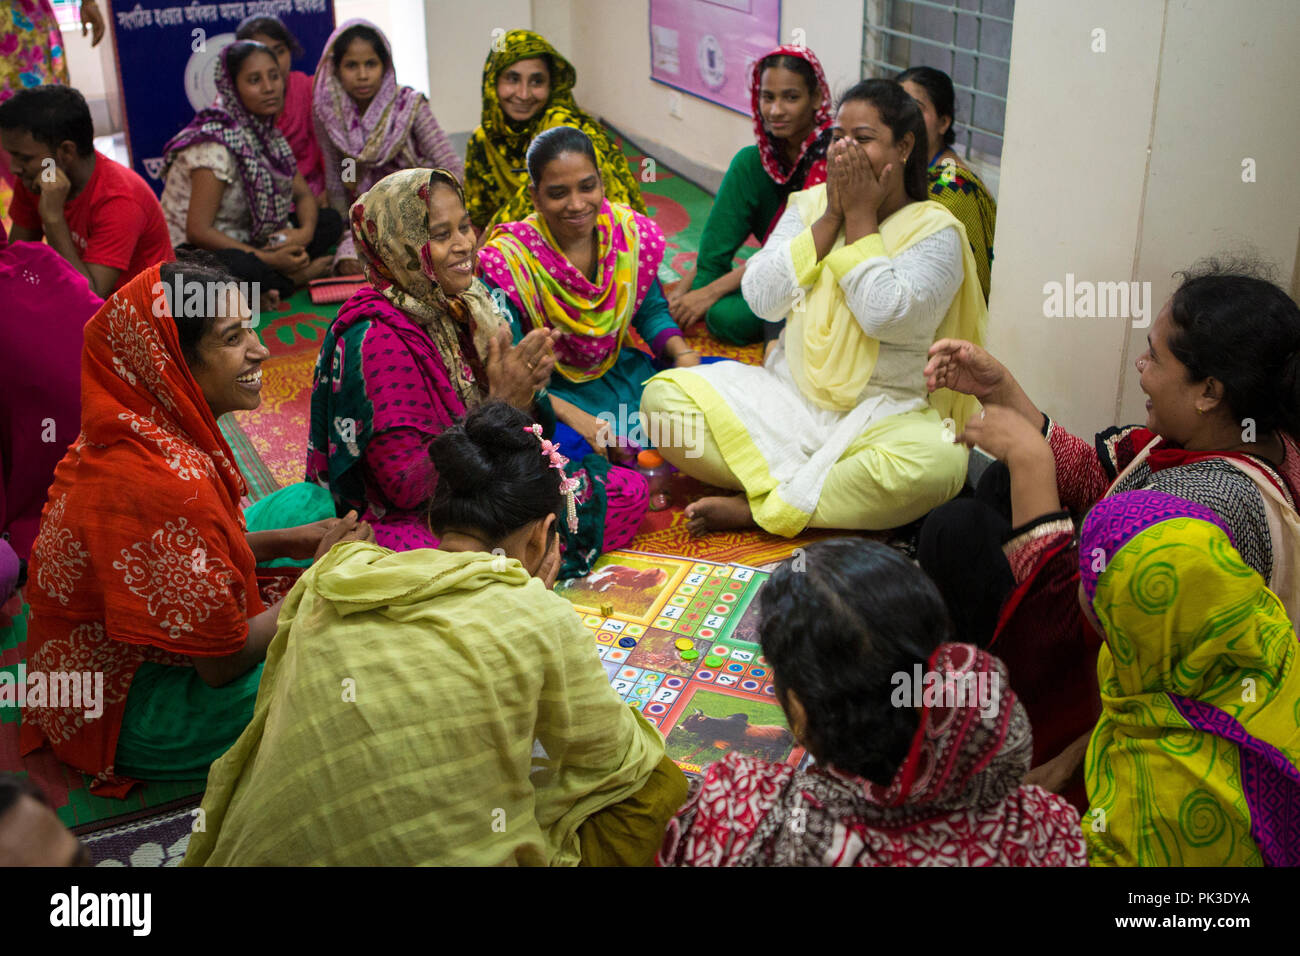 Garment workers laughing as they play a board game during a workshop in Dhaka, Bangladesh. Stock Photo